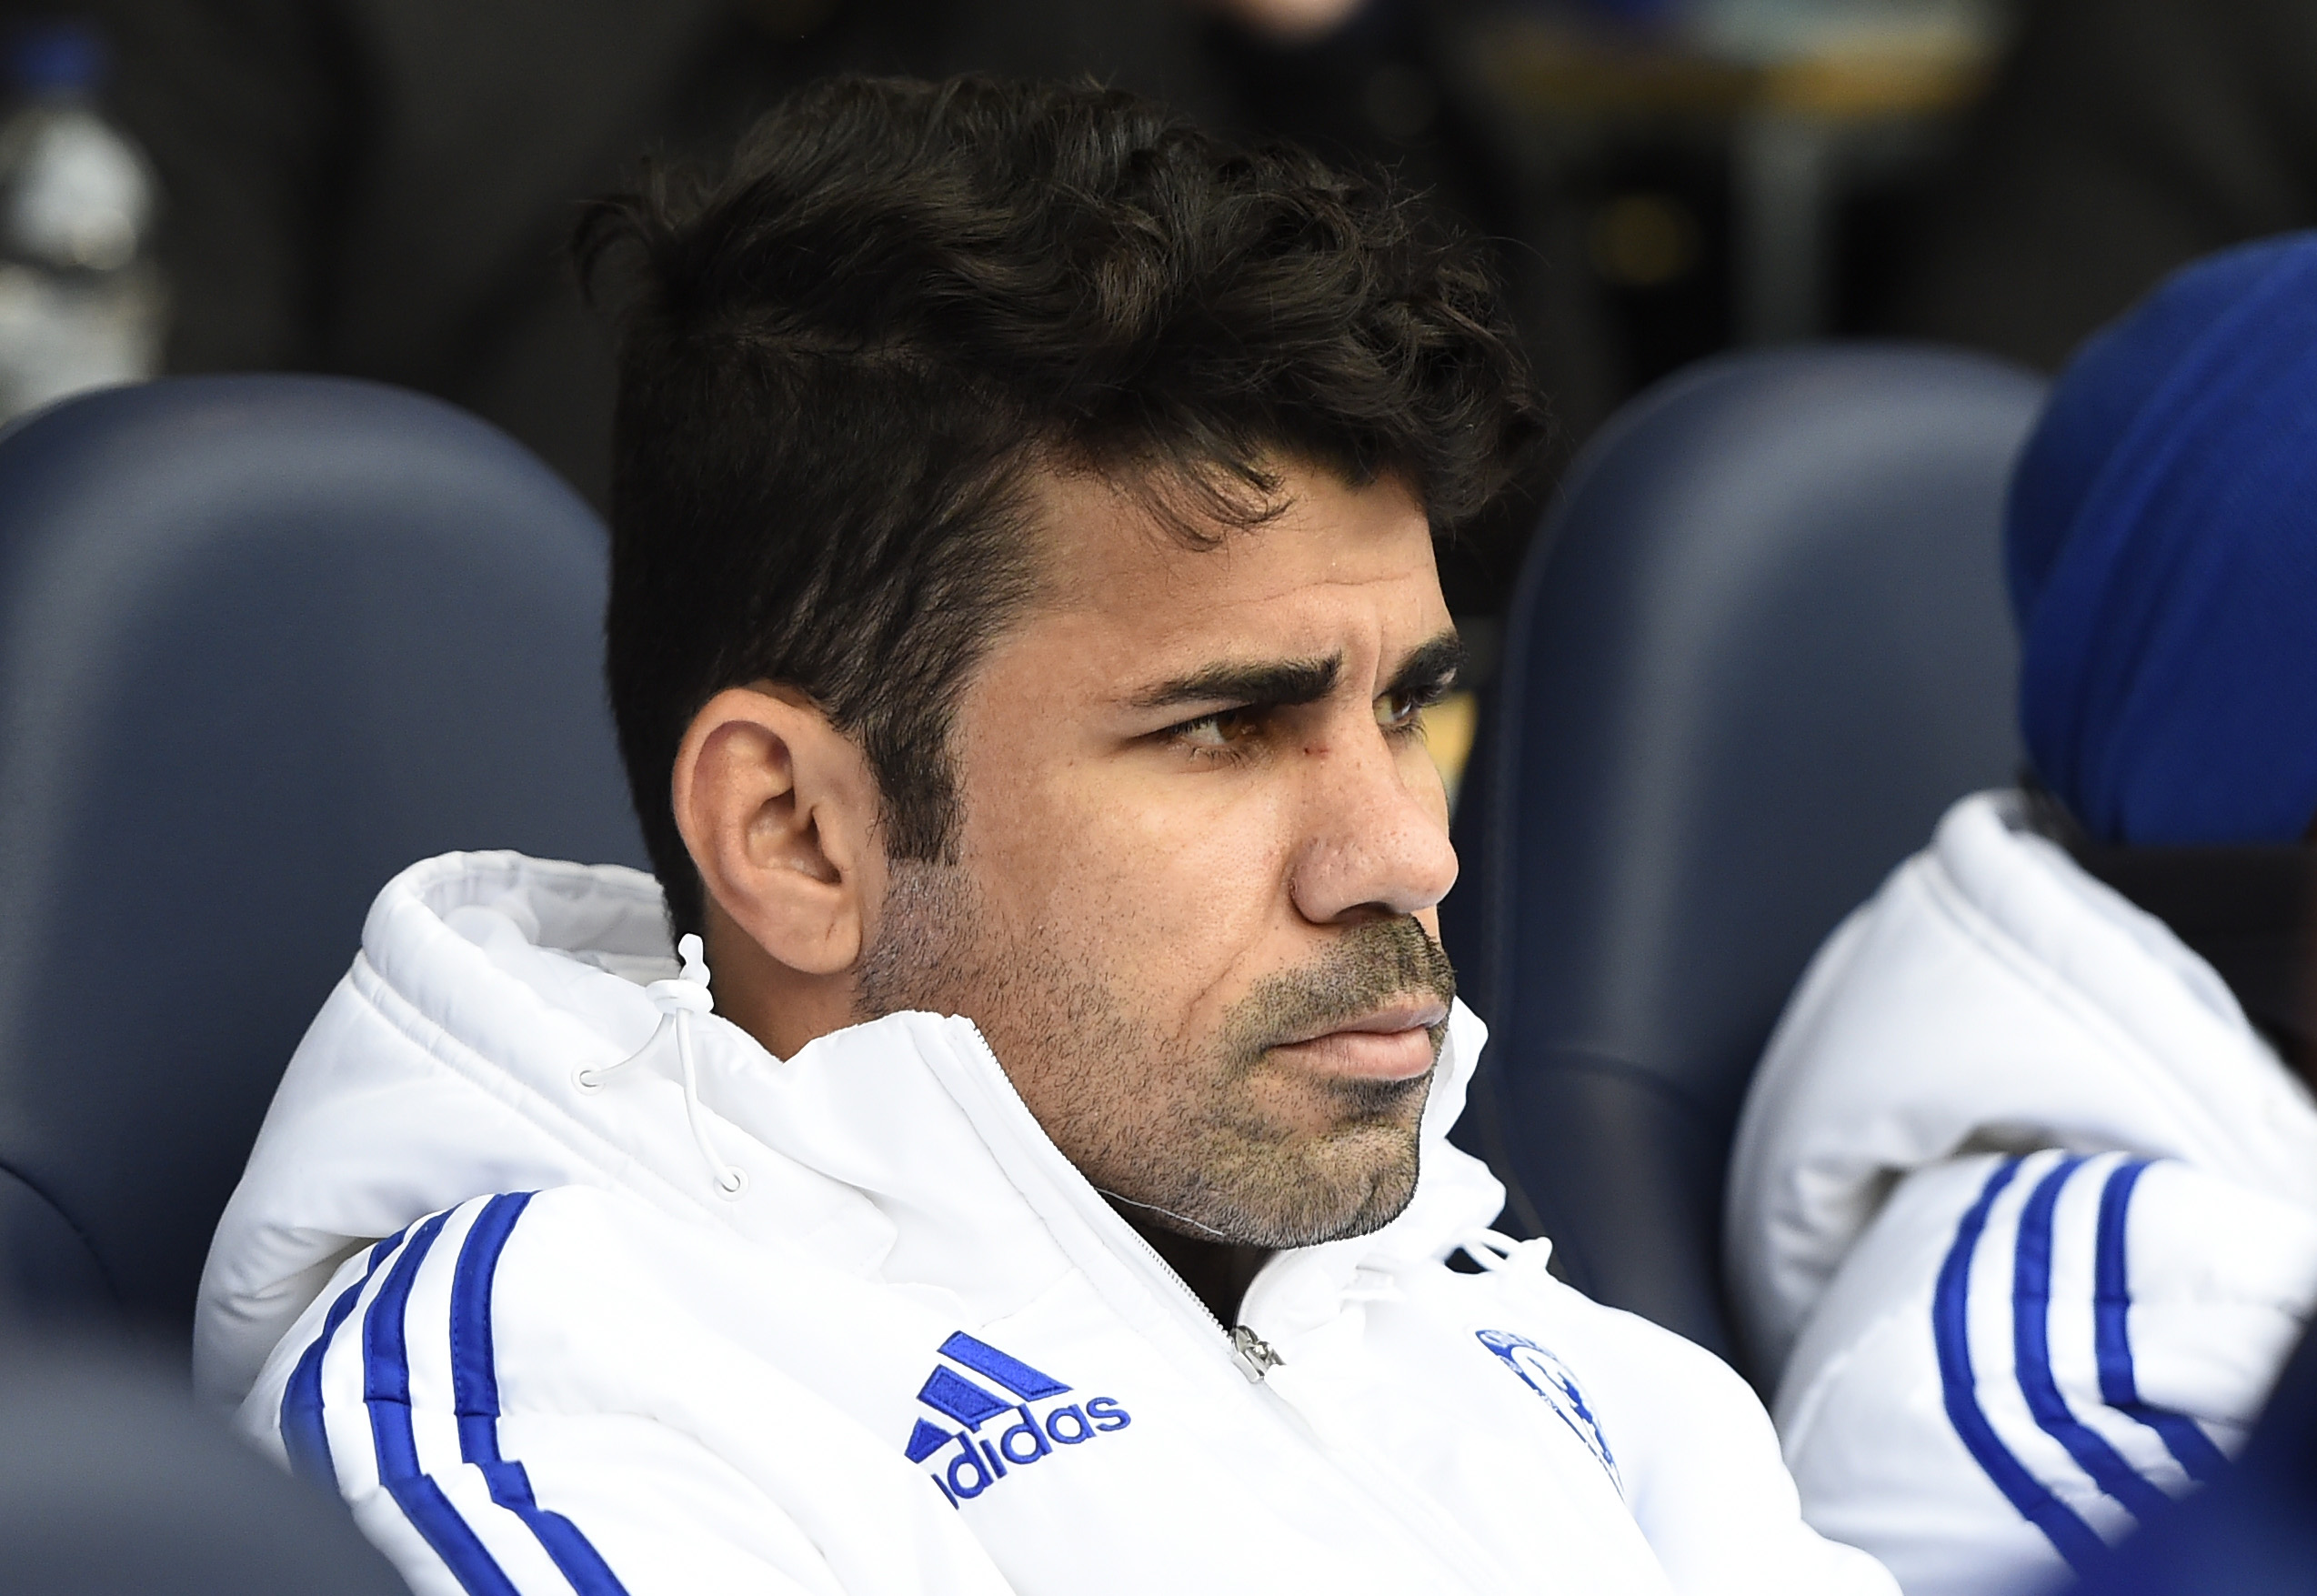 Chelsea's Diego Costa on the bench before the match against Tottonhem Hotspur on November 29, 2015. Photo: Reuters